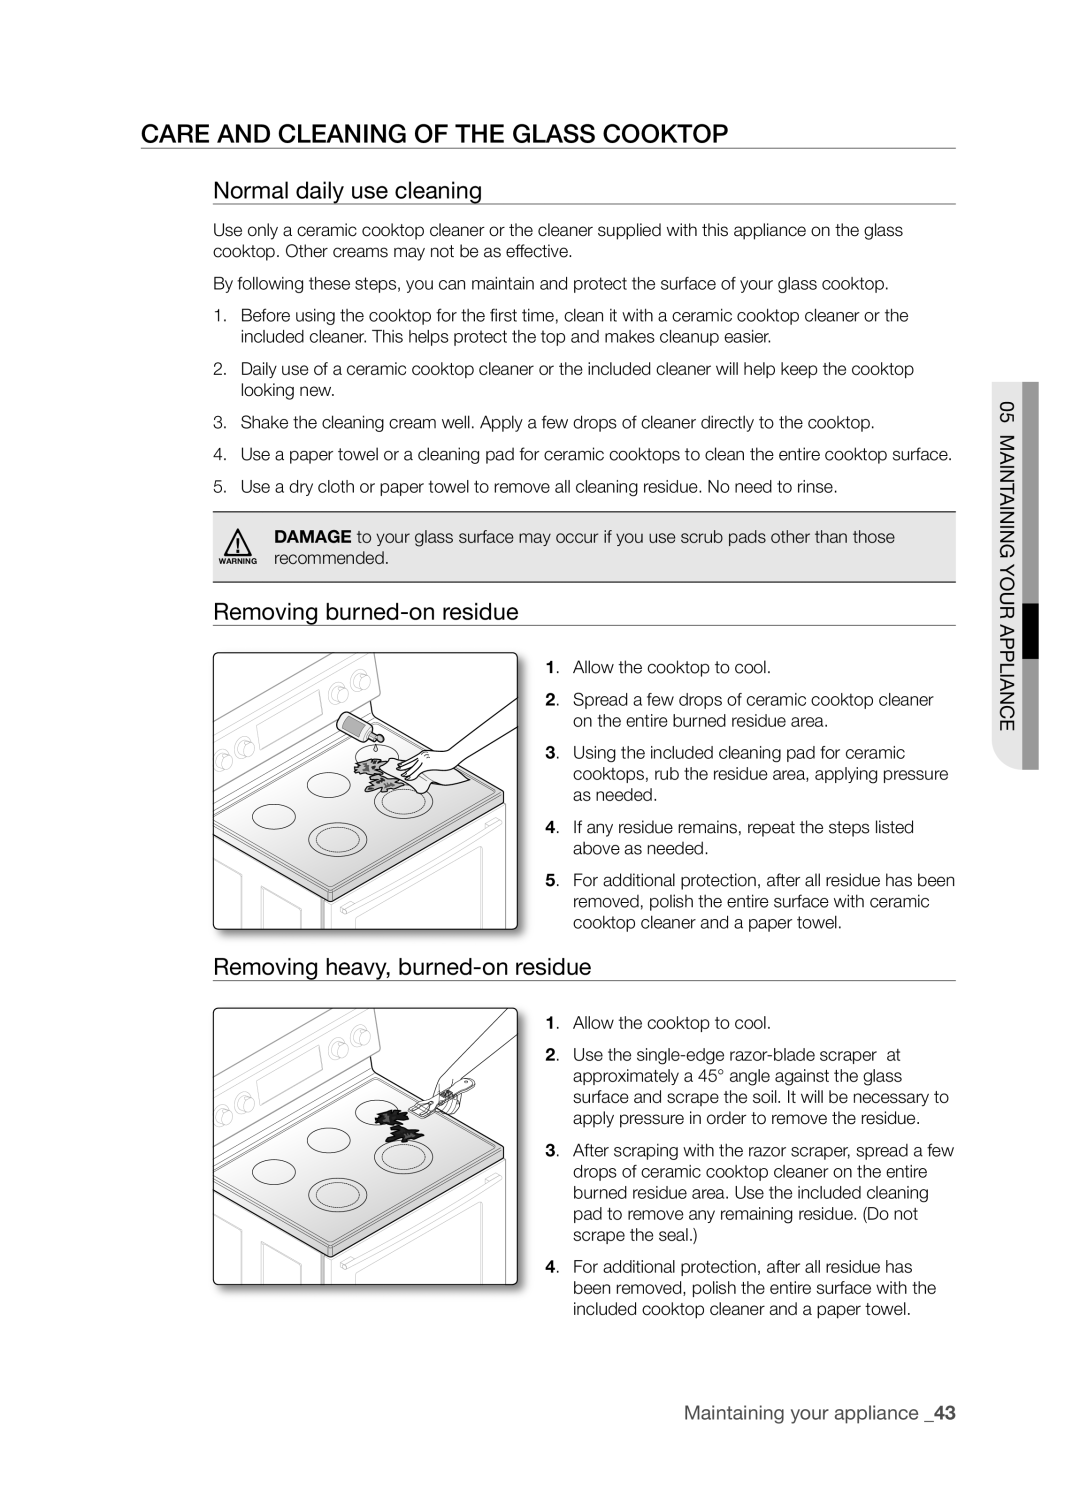 Samsung FTQ352IWX user manual Care And Cleaning Of The Glass Cooktop, Normal daily use cleaning, Removing burned-onresidue 